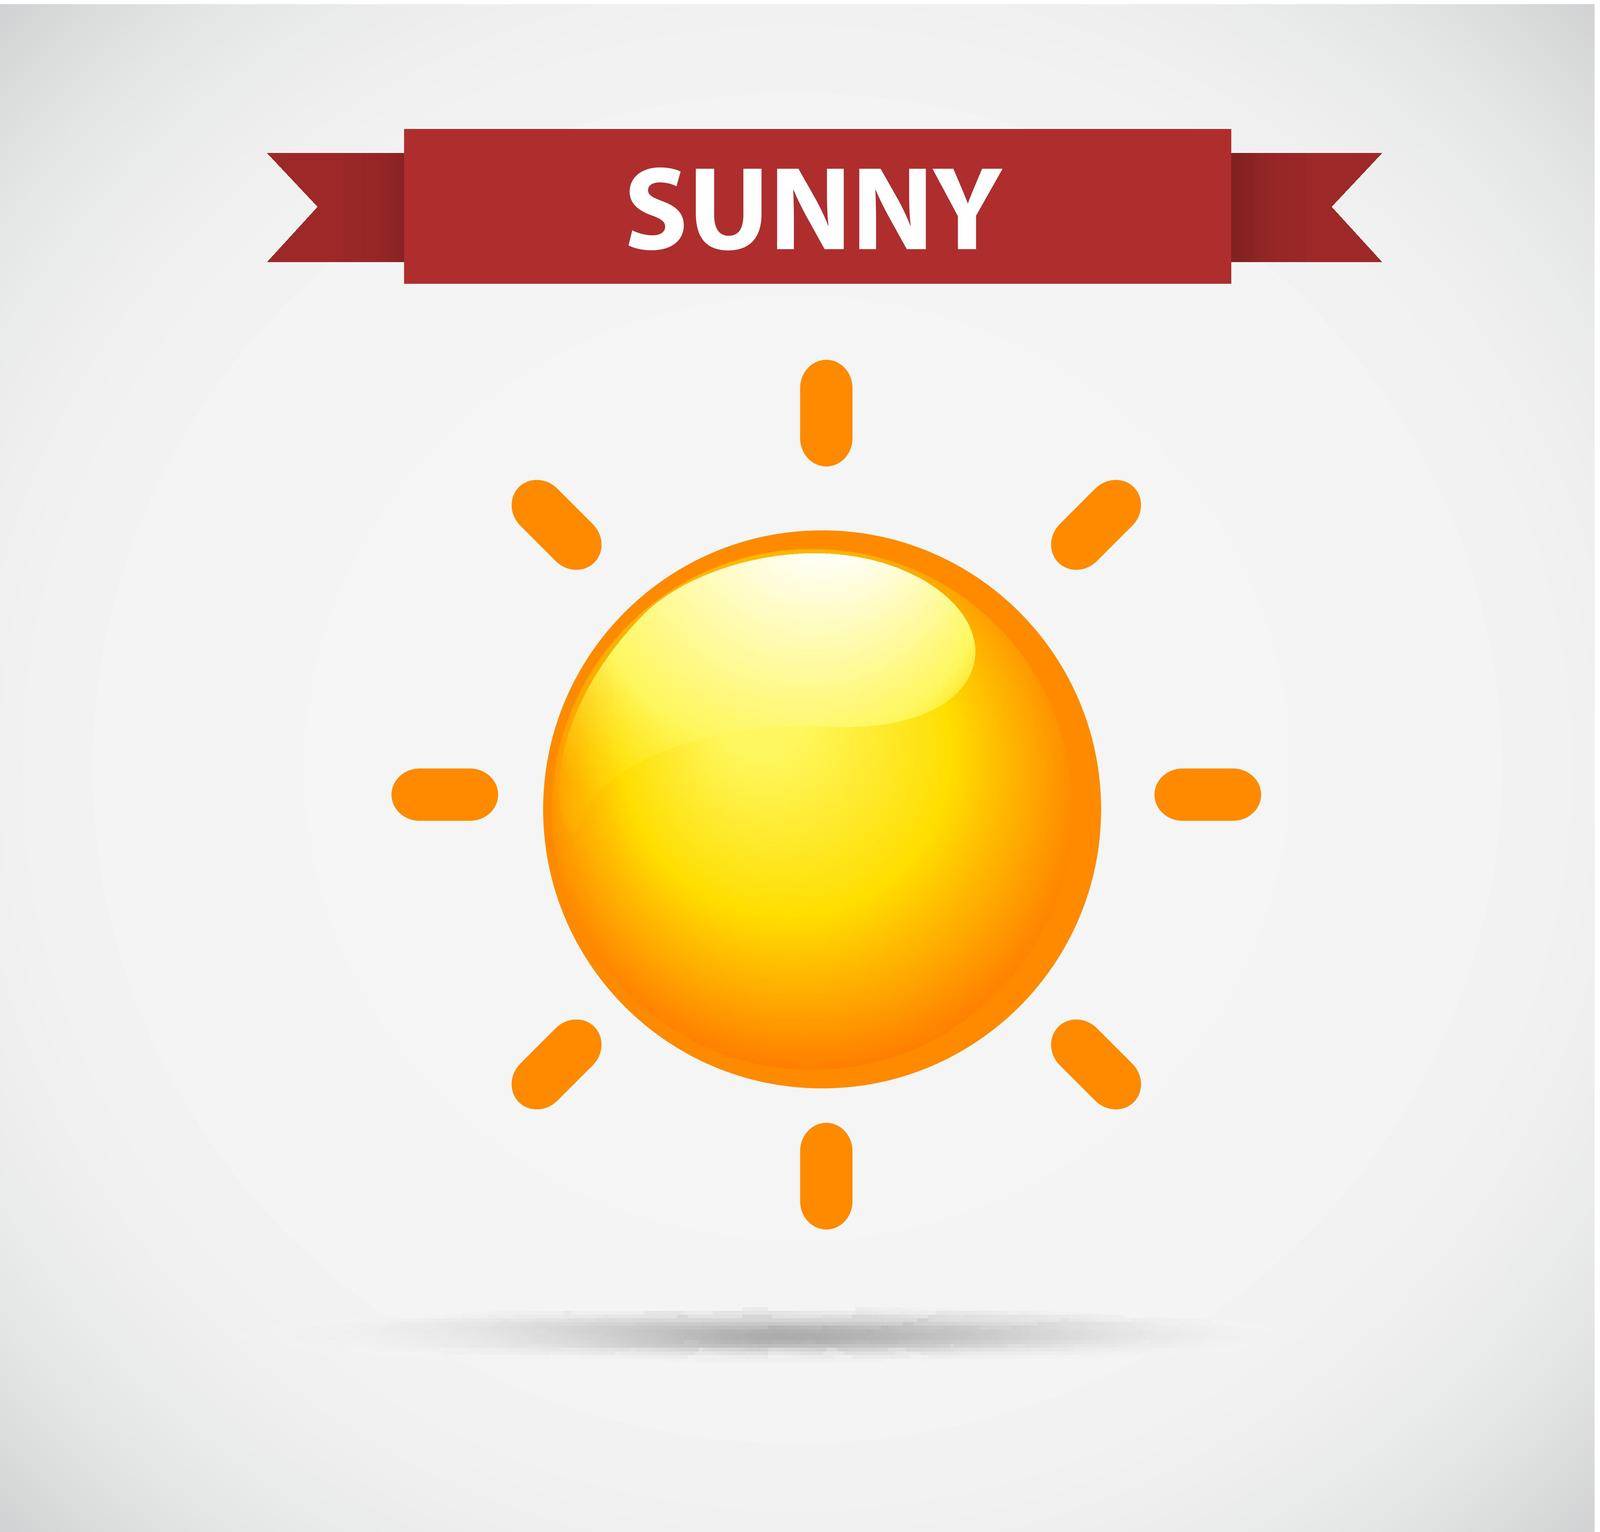 Weather icon design for sunny by iimages